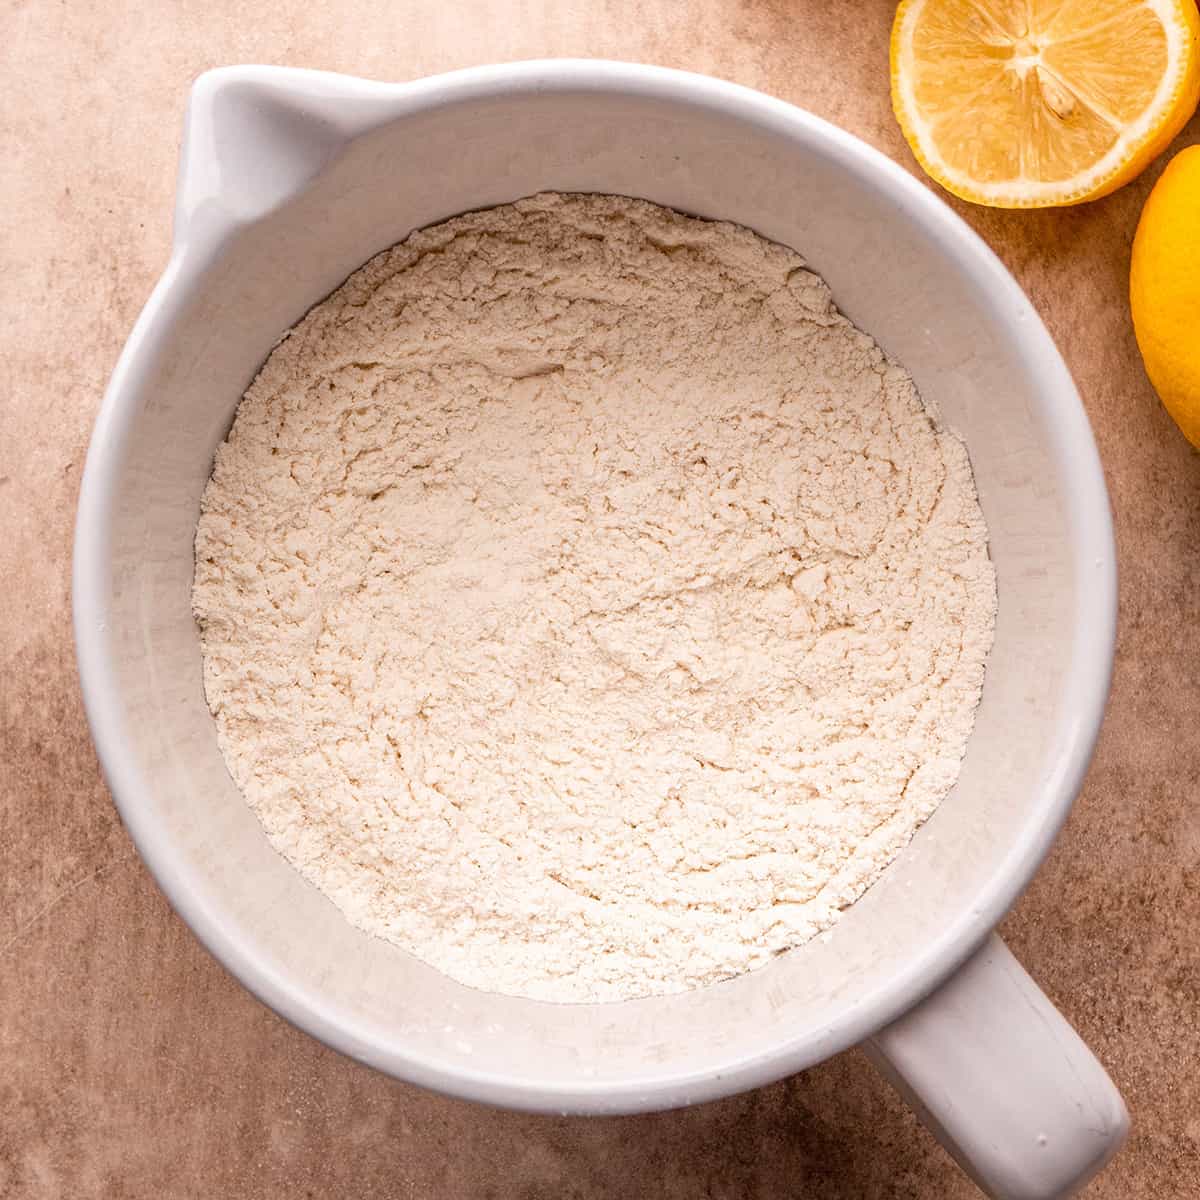 dry ingredients in a bowl to make this Lemon Poppy Seed Bread